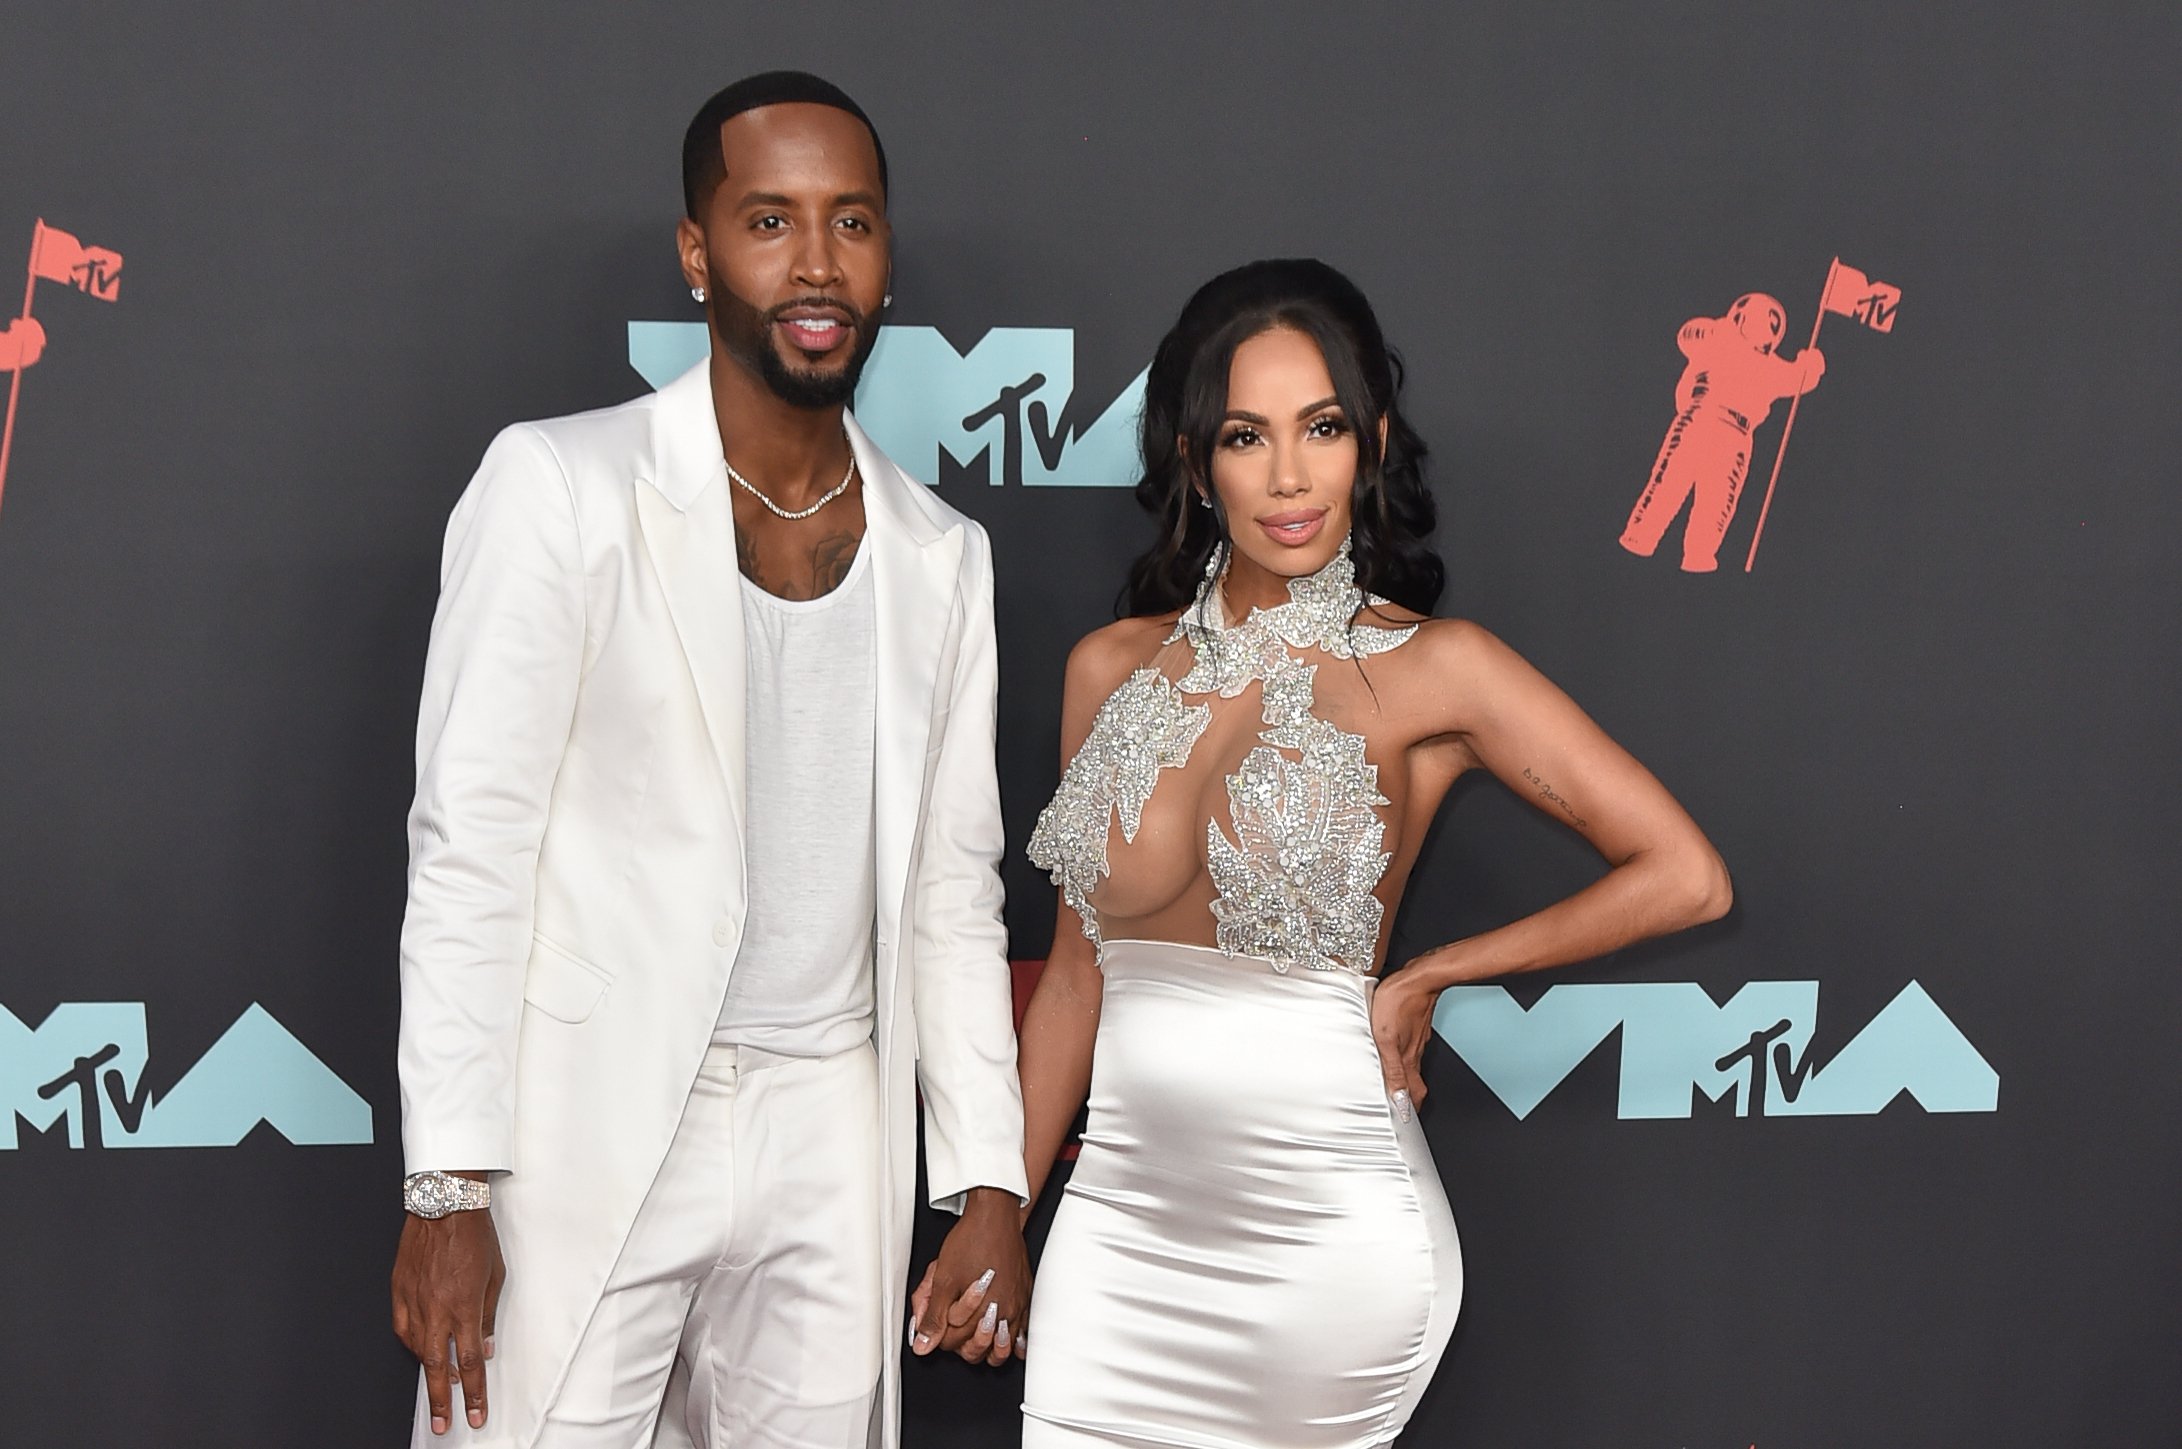 Safaree Samuels and Erica Mena at the 2019 MTV Video Music Awards at Prudential Center on August 26, 2019 | Photo: Getty Images